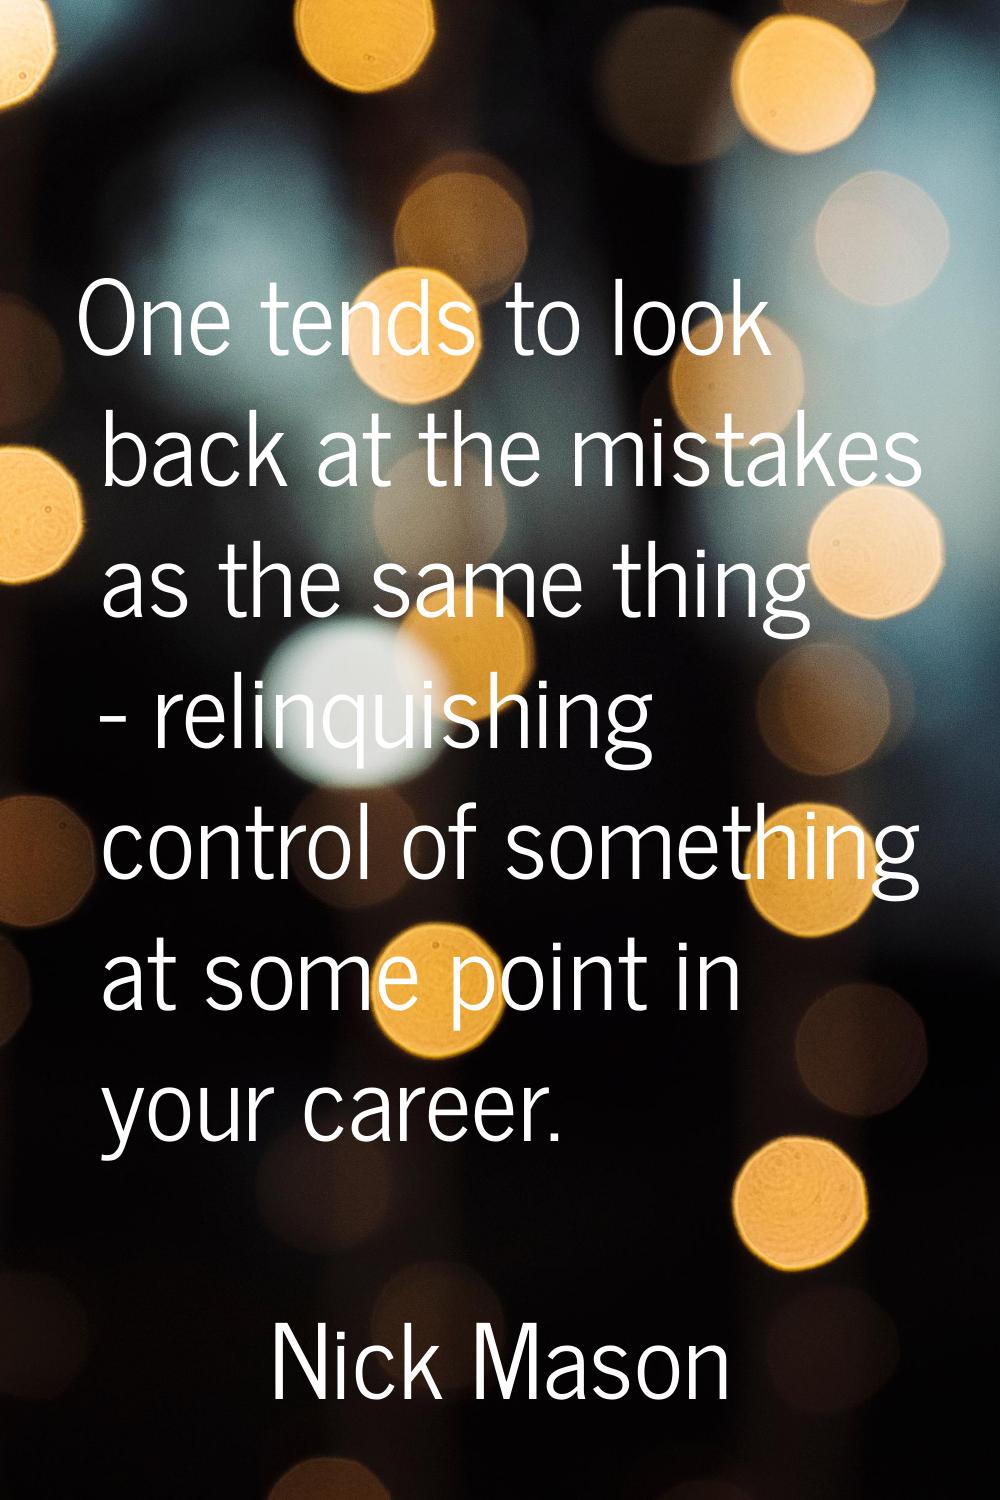 One tends to look back at the mistakes as the same thing - relinquishing control of something at so